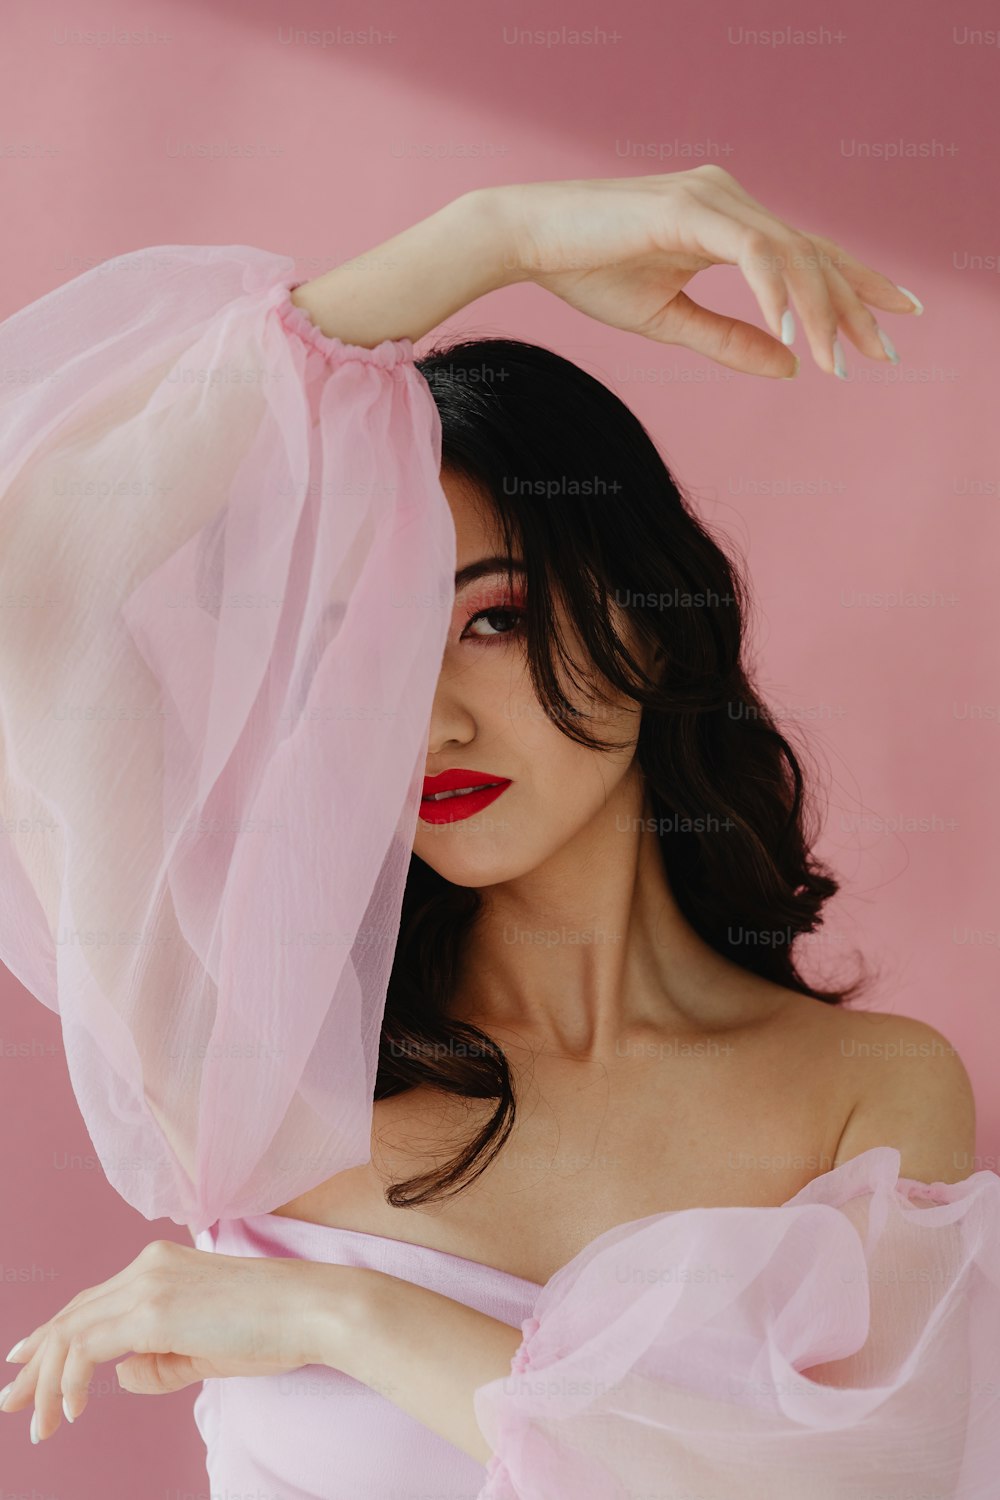 Pink Dress Pictures [Hd] | Download Free Images On Unsplash